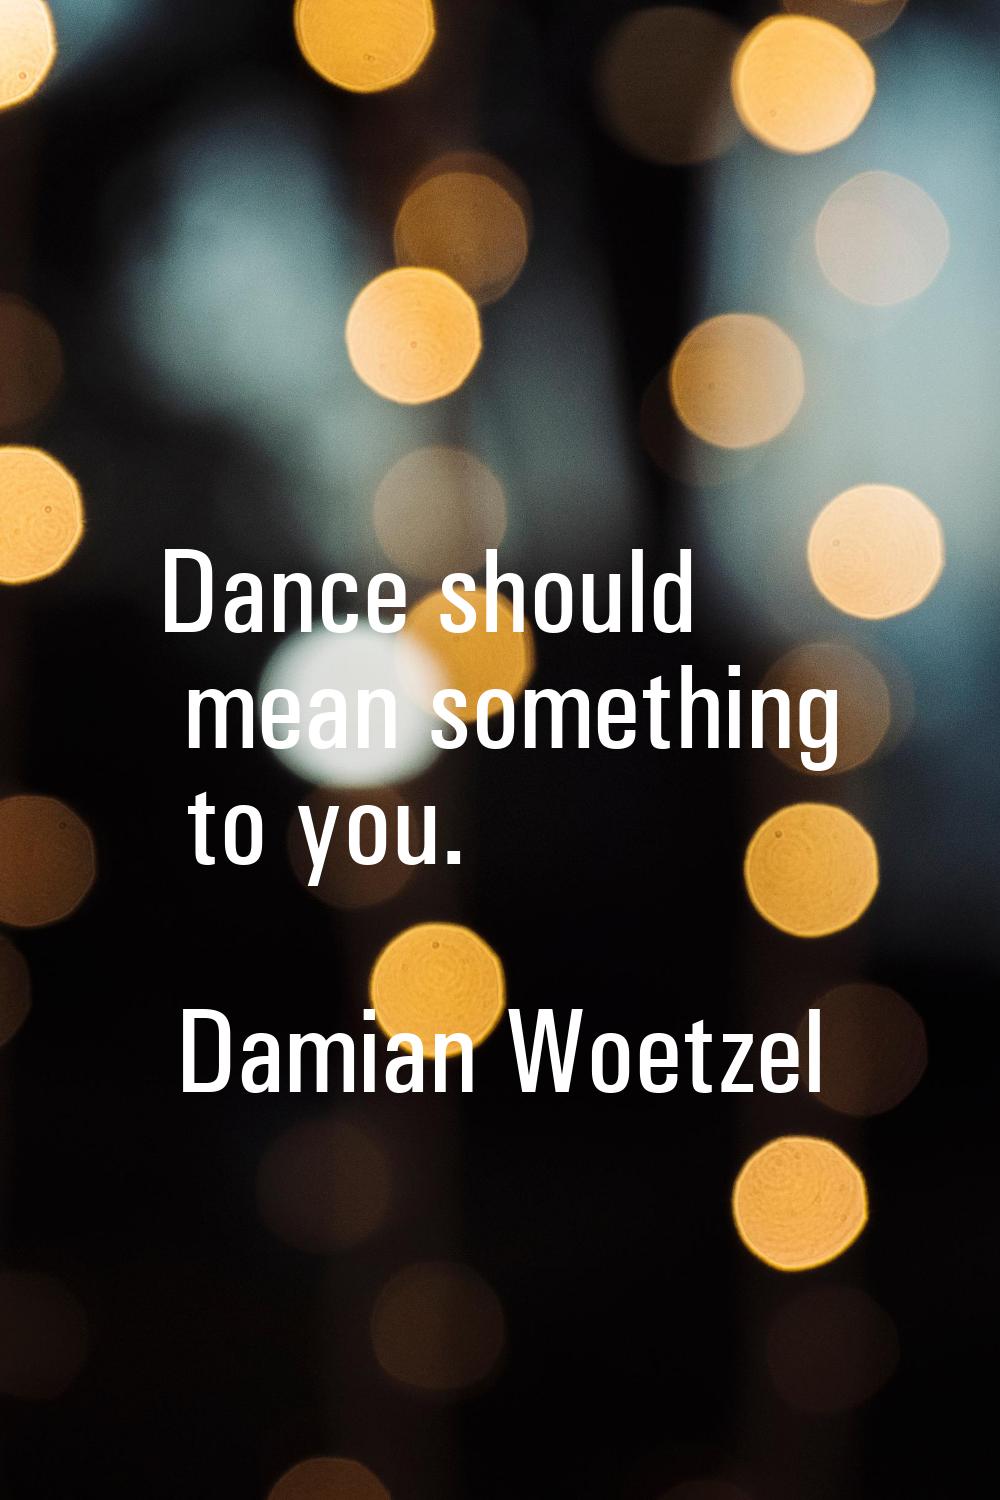 Dance should mean something to you.